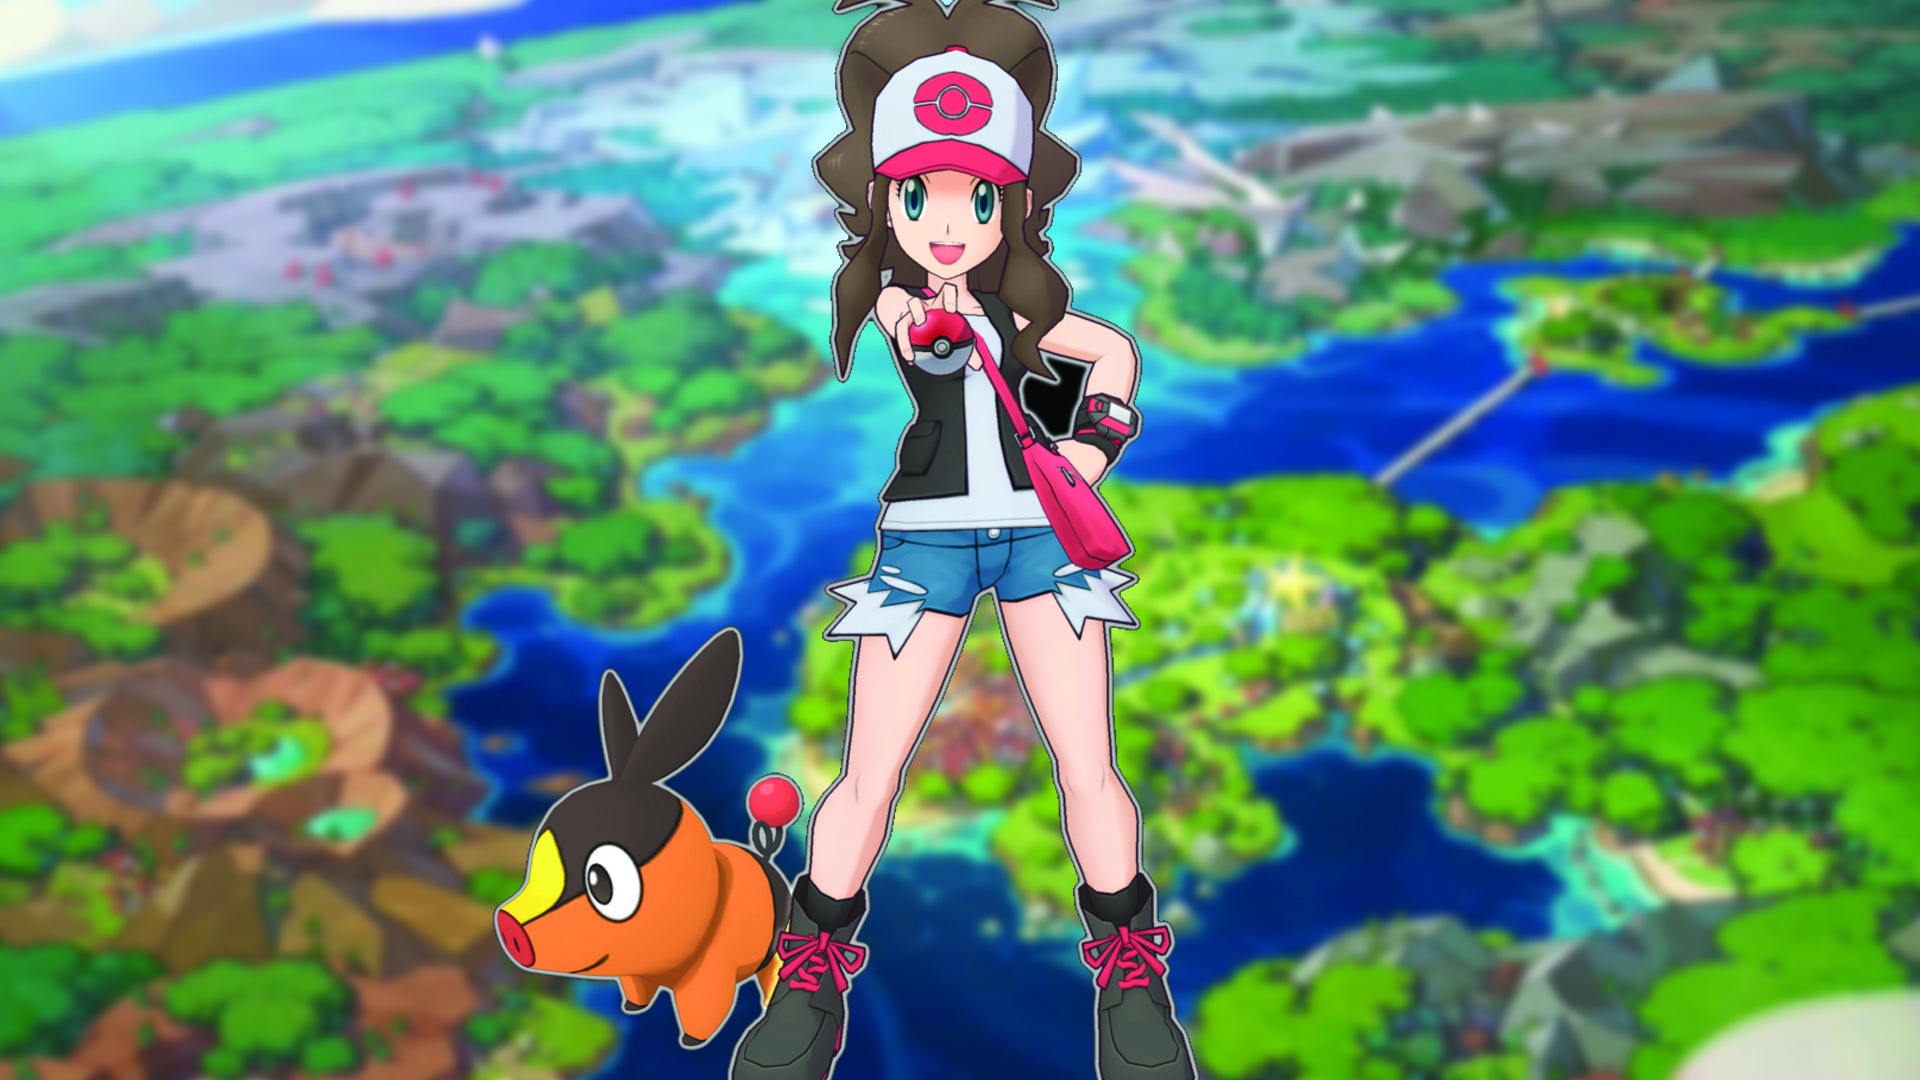 Hilda, Tepig join Pokémon Masters as newest sync pair – Nintendo Wire